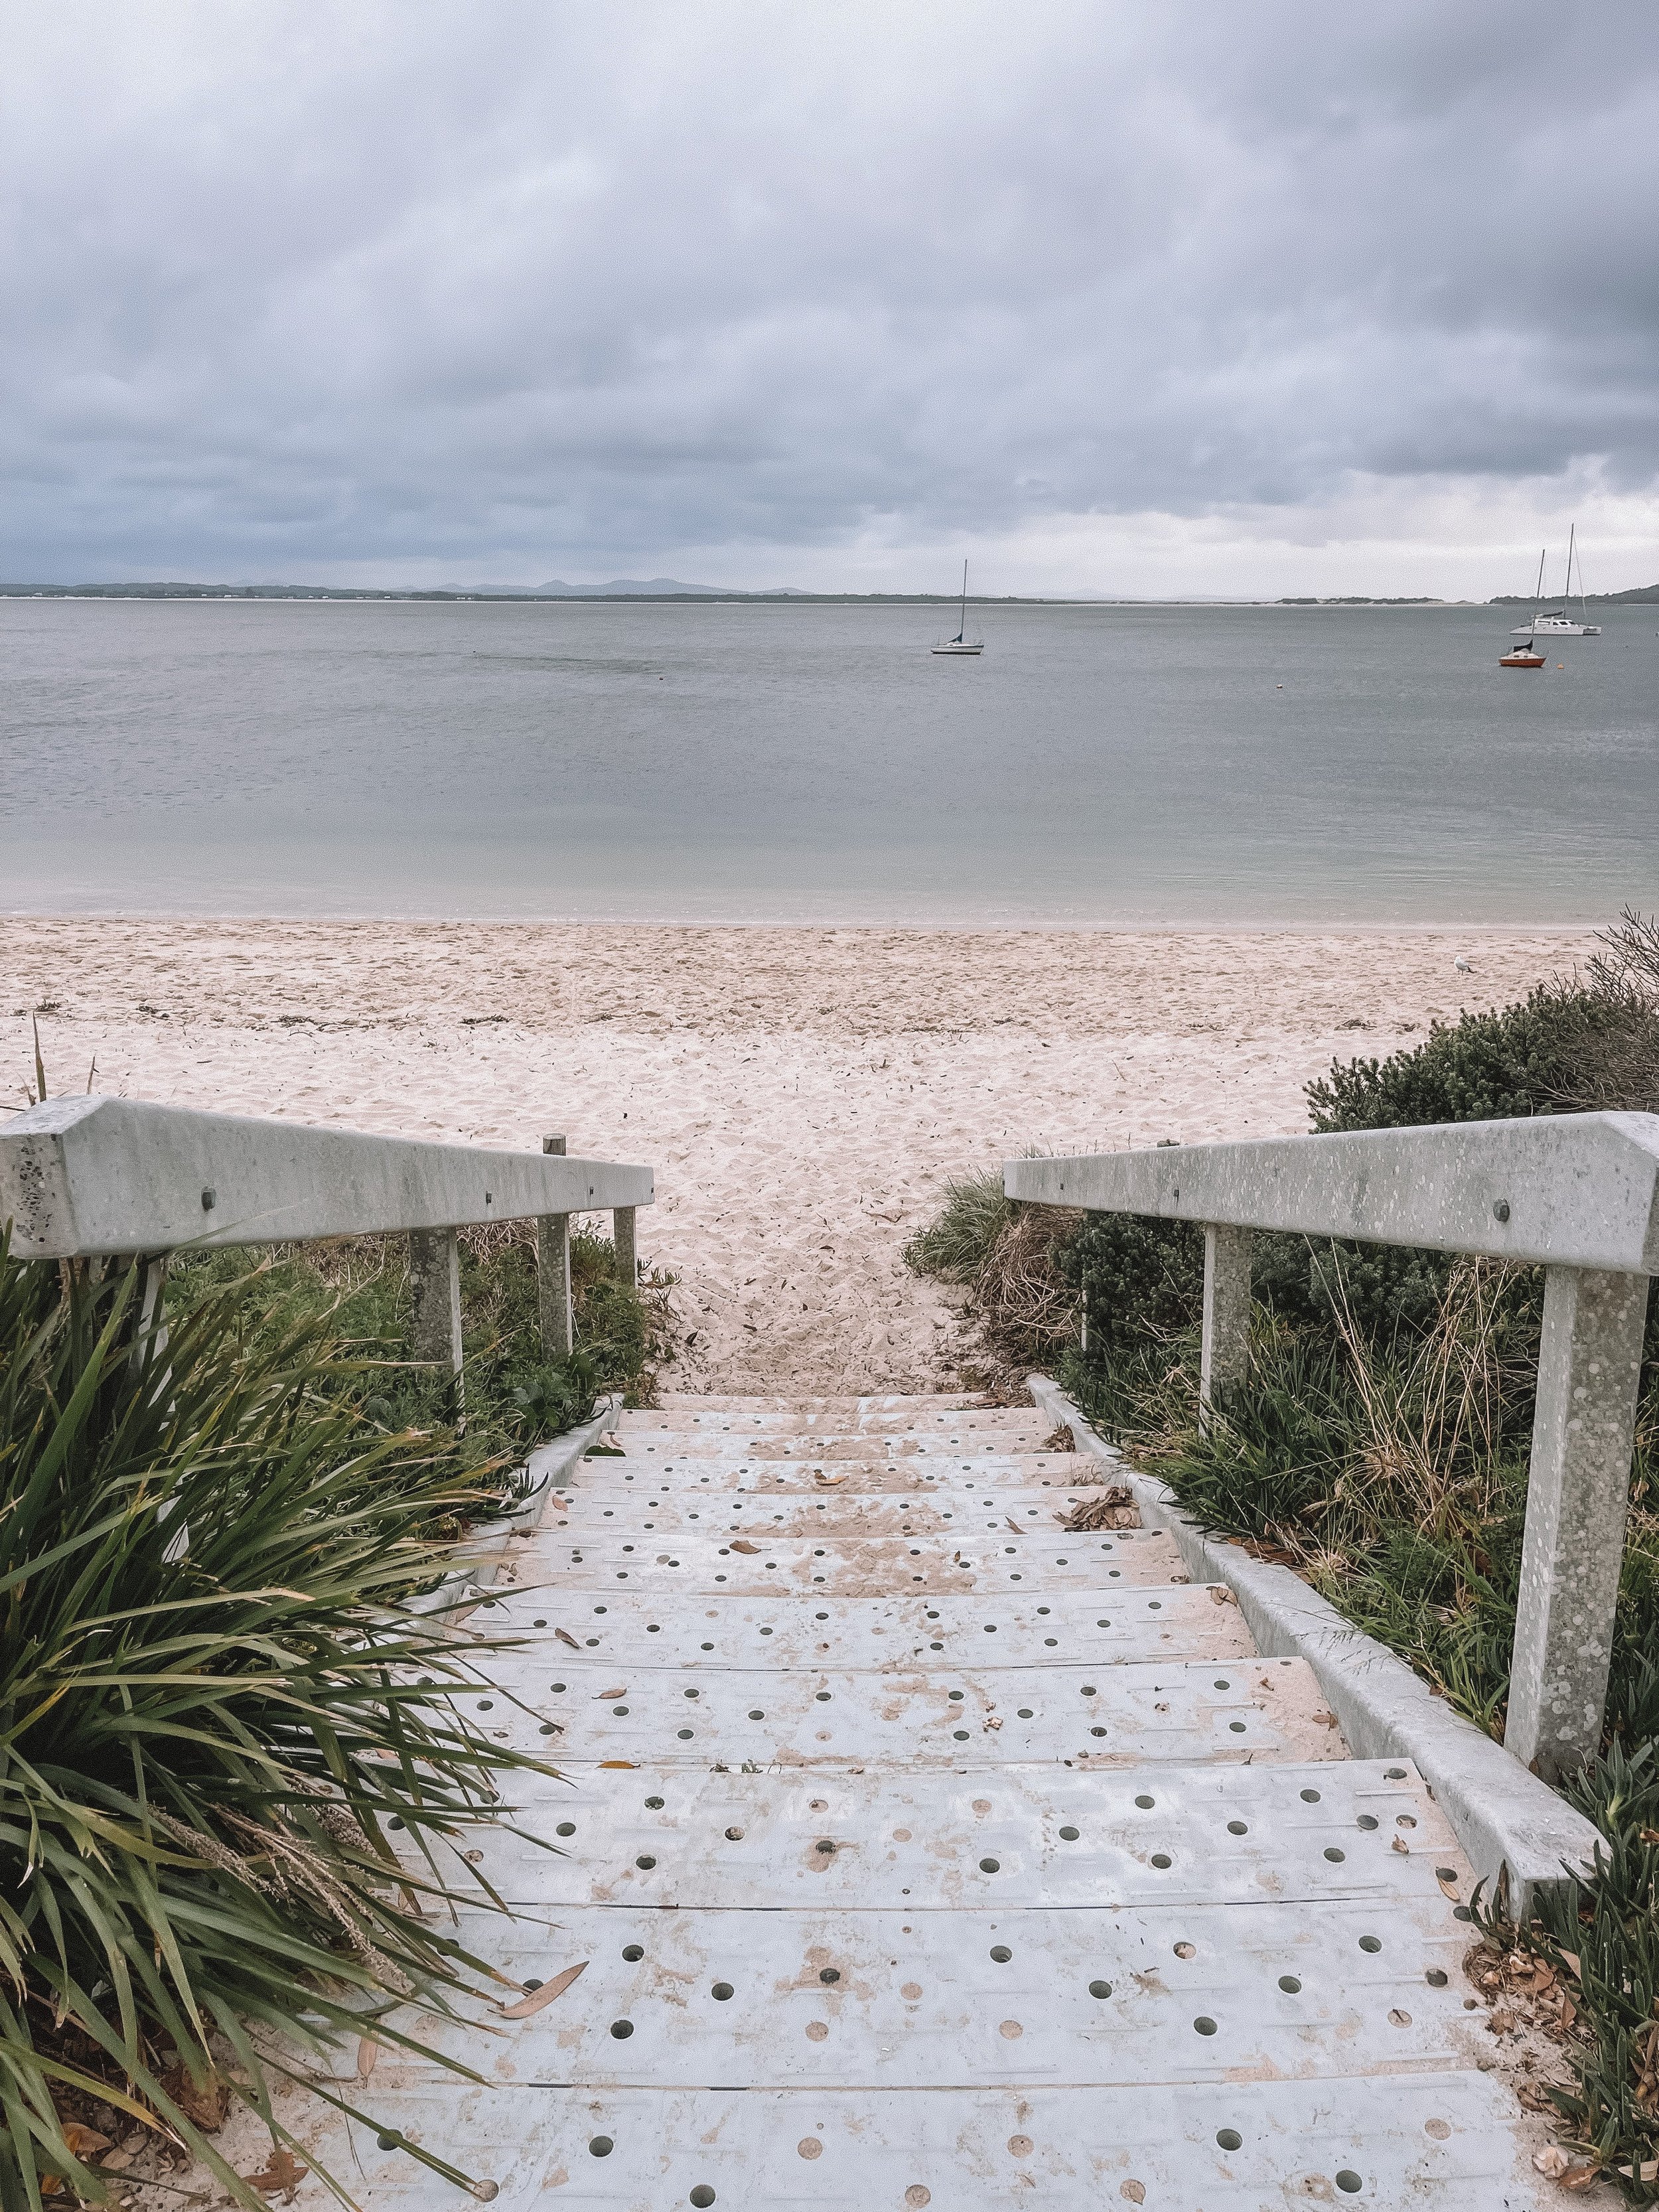 Stairway to Shoal Bay - Port Stephens - New South Wales (NSW) - Australia